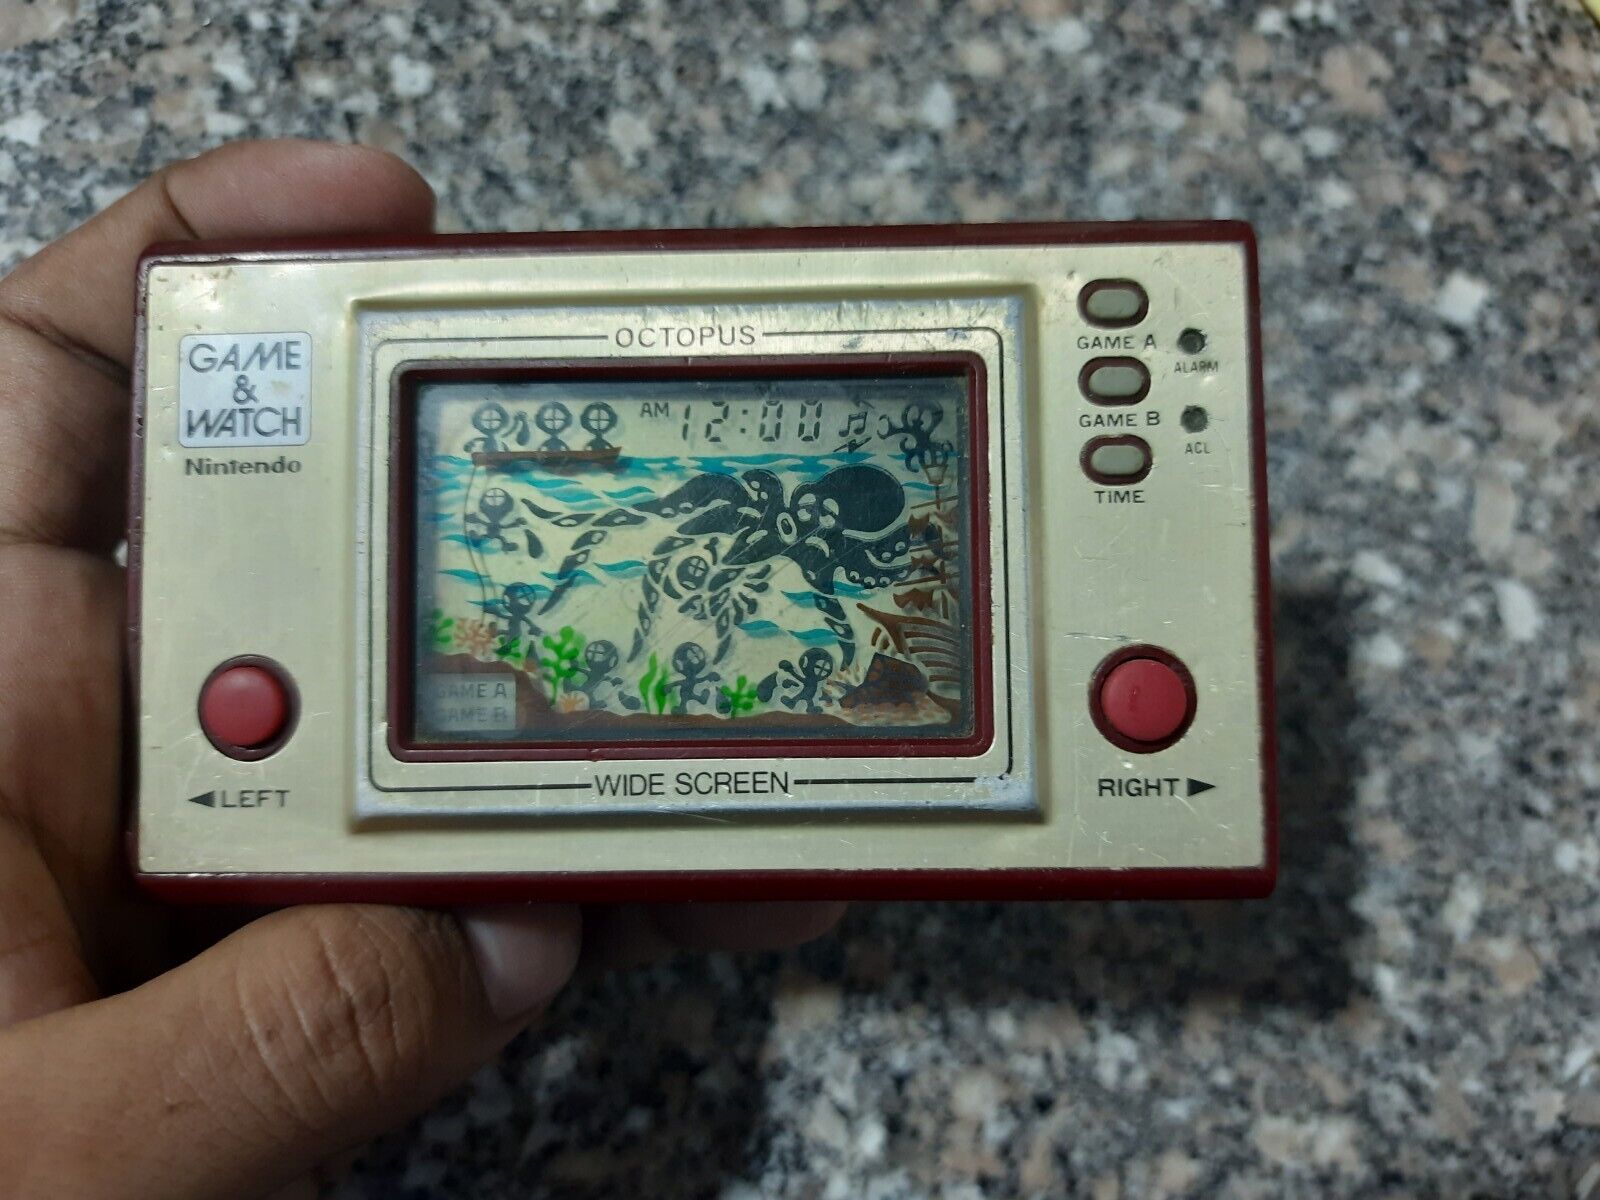 GAME And WATCH OCTOPUS 1981 Wide Screen NINTENDO JAPAN #1 